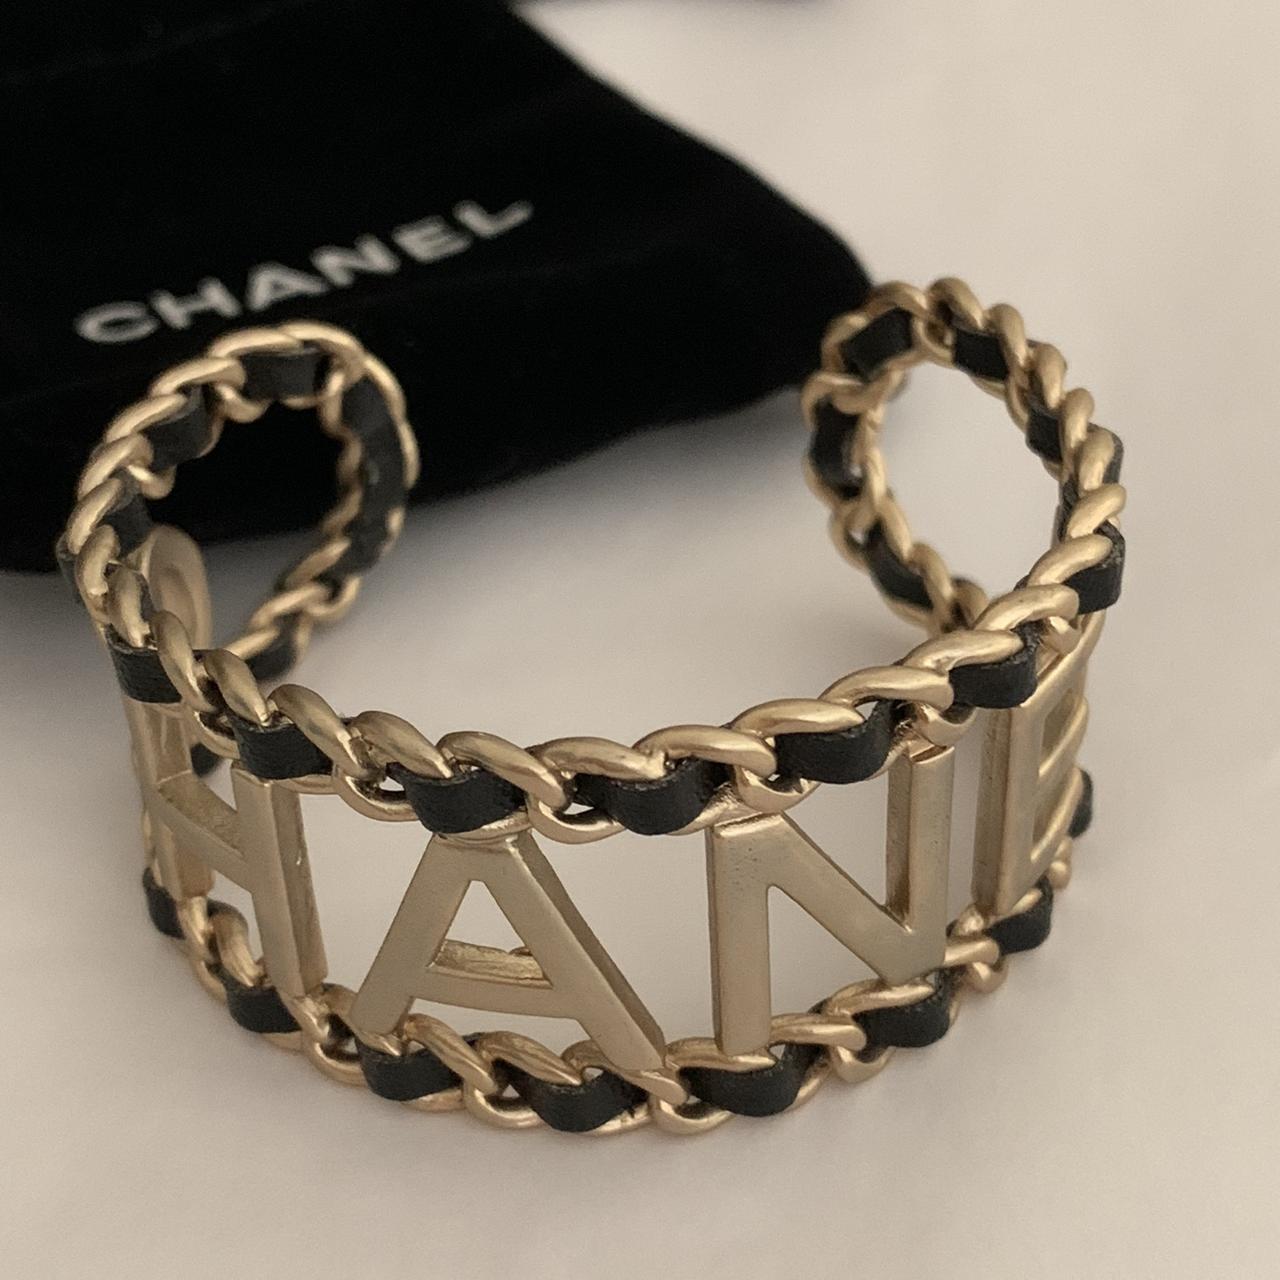 Authentic Chanel Vintage Allure Leather Cuff